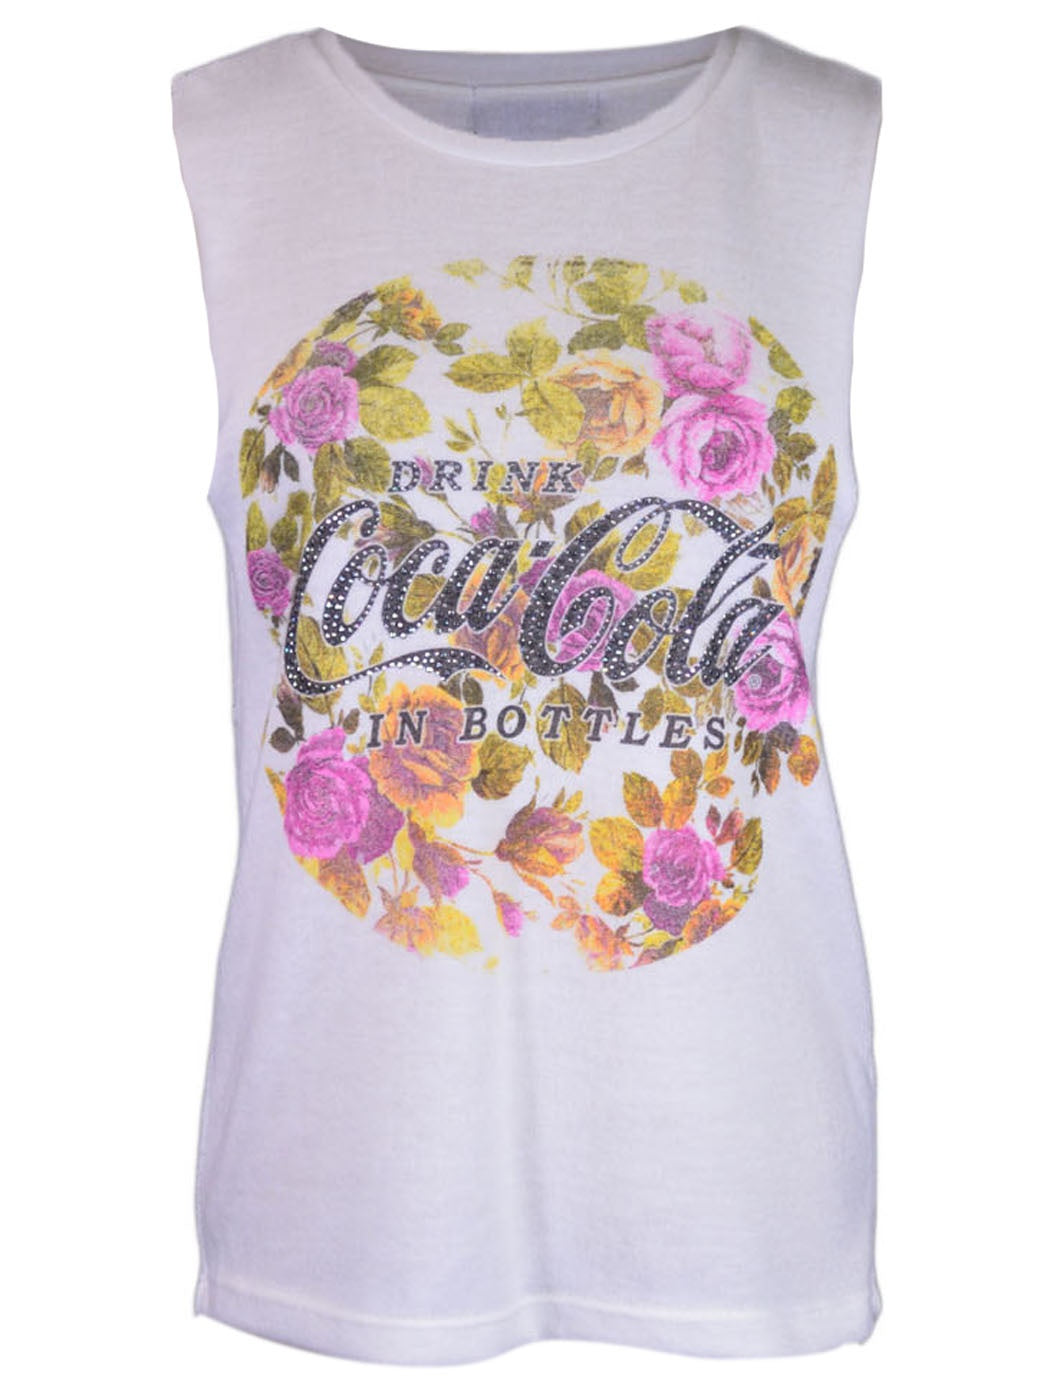 The Classic Casual Sunset Floral Coca-Cola Logo Crew Neck Sleeveless Knit Top